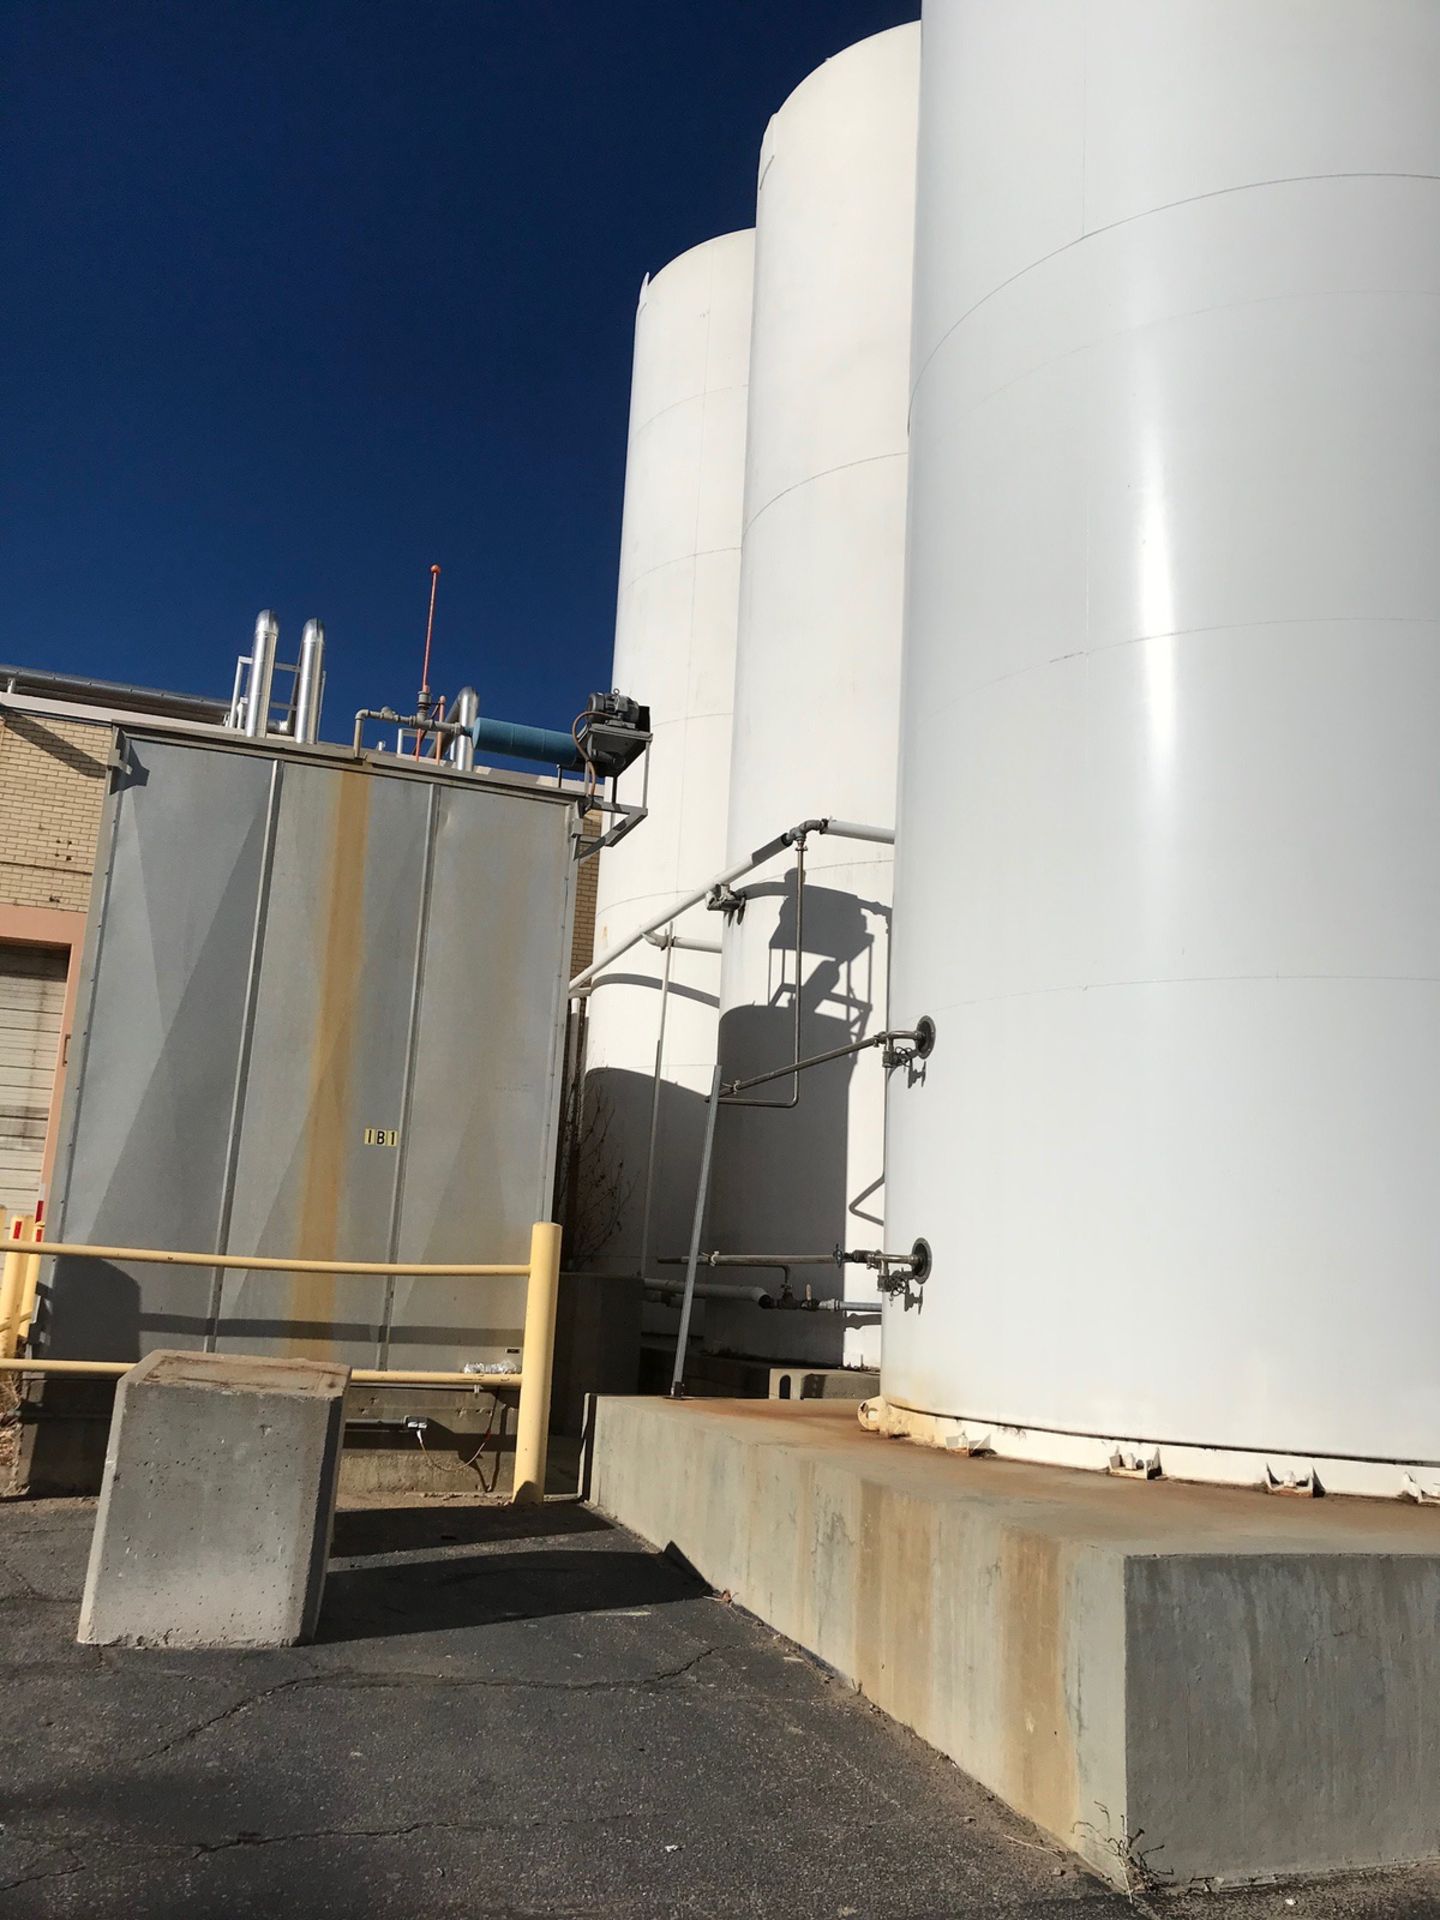 DAIRY CRAFT 30,000 GALLON SILO, GLYCOL JACKETED, HORIZONTAL AGITATOR, (2) AIR VALVE | Rig Fee: $9500 - Image 3 of 4